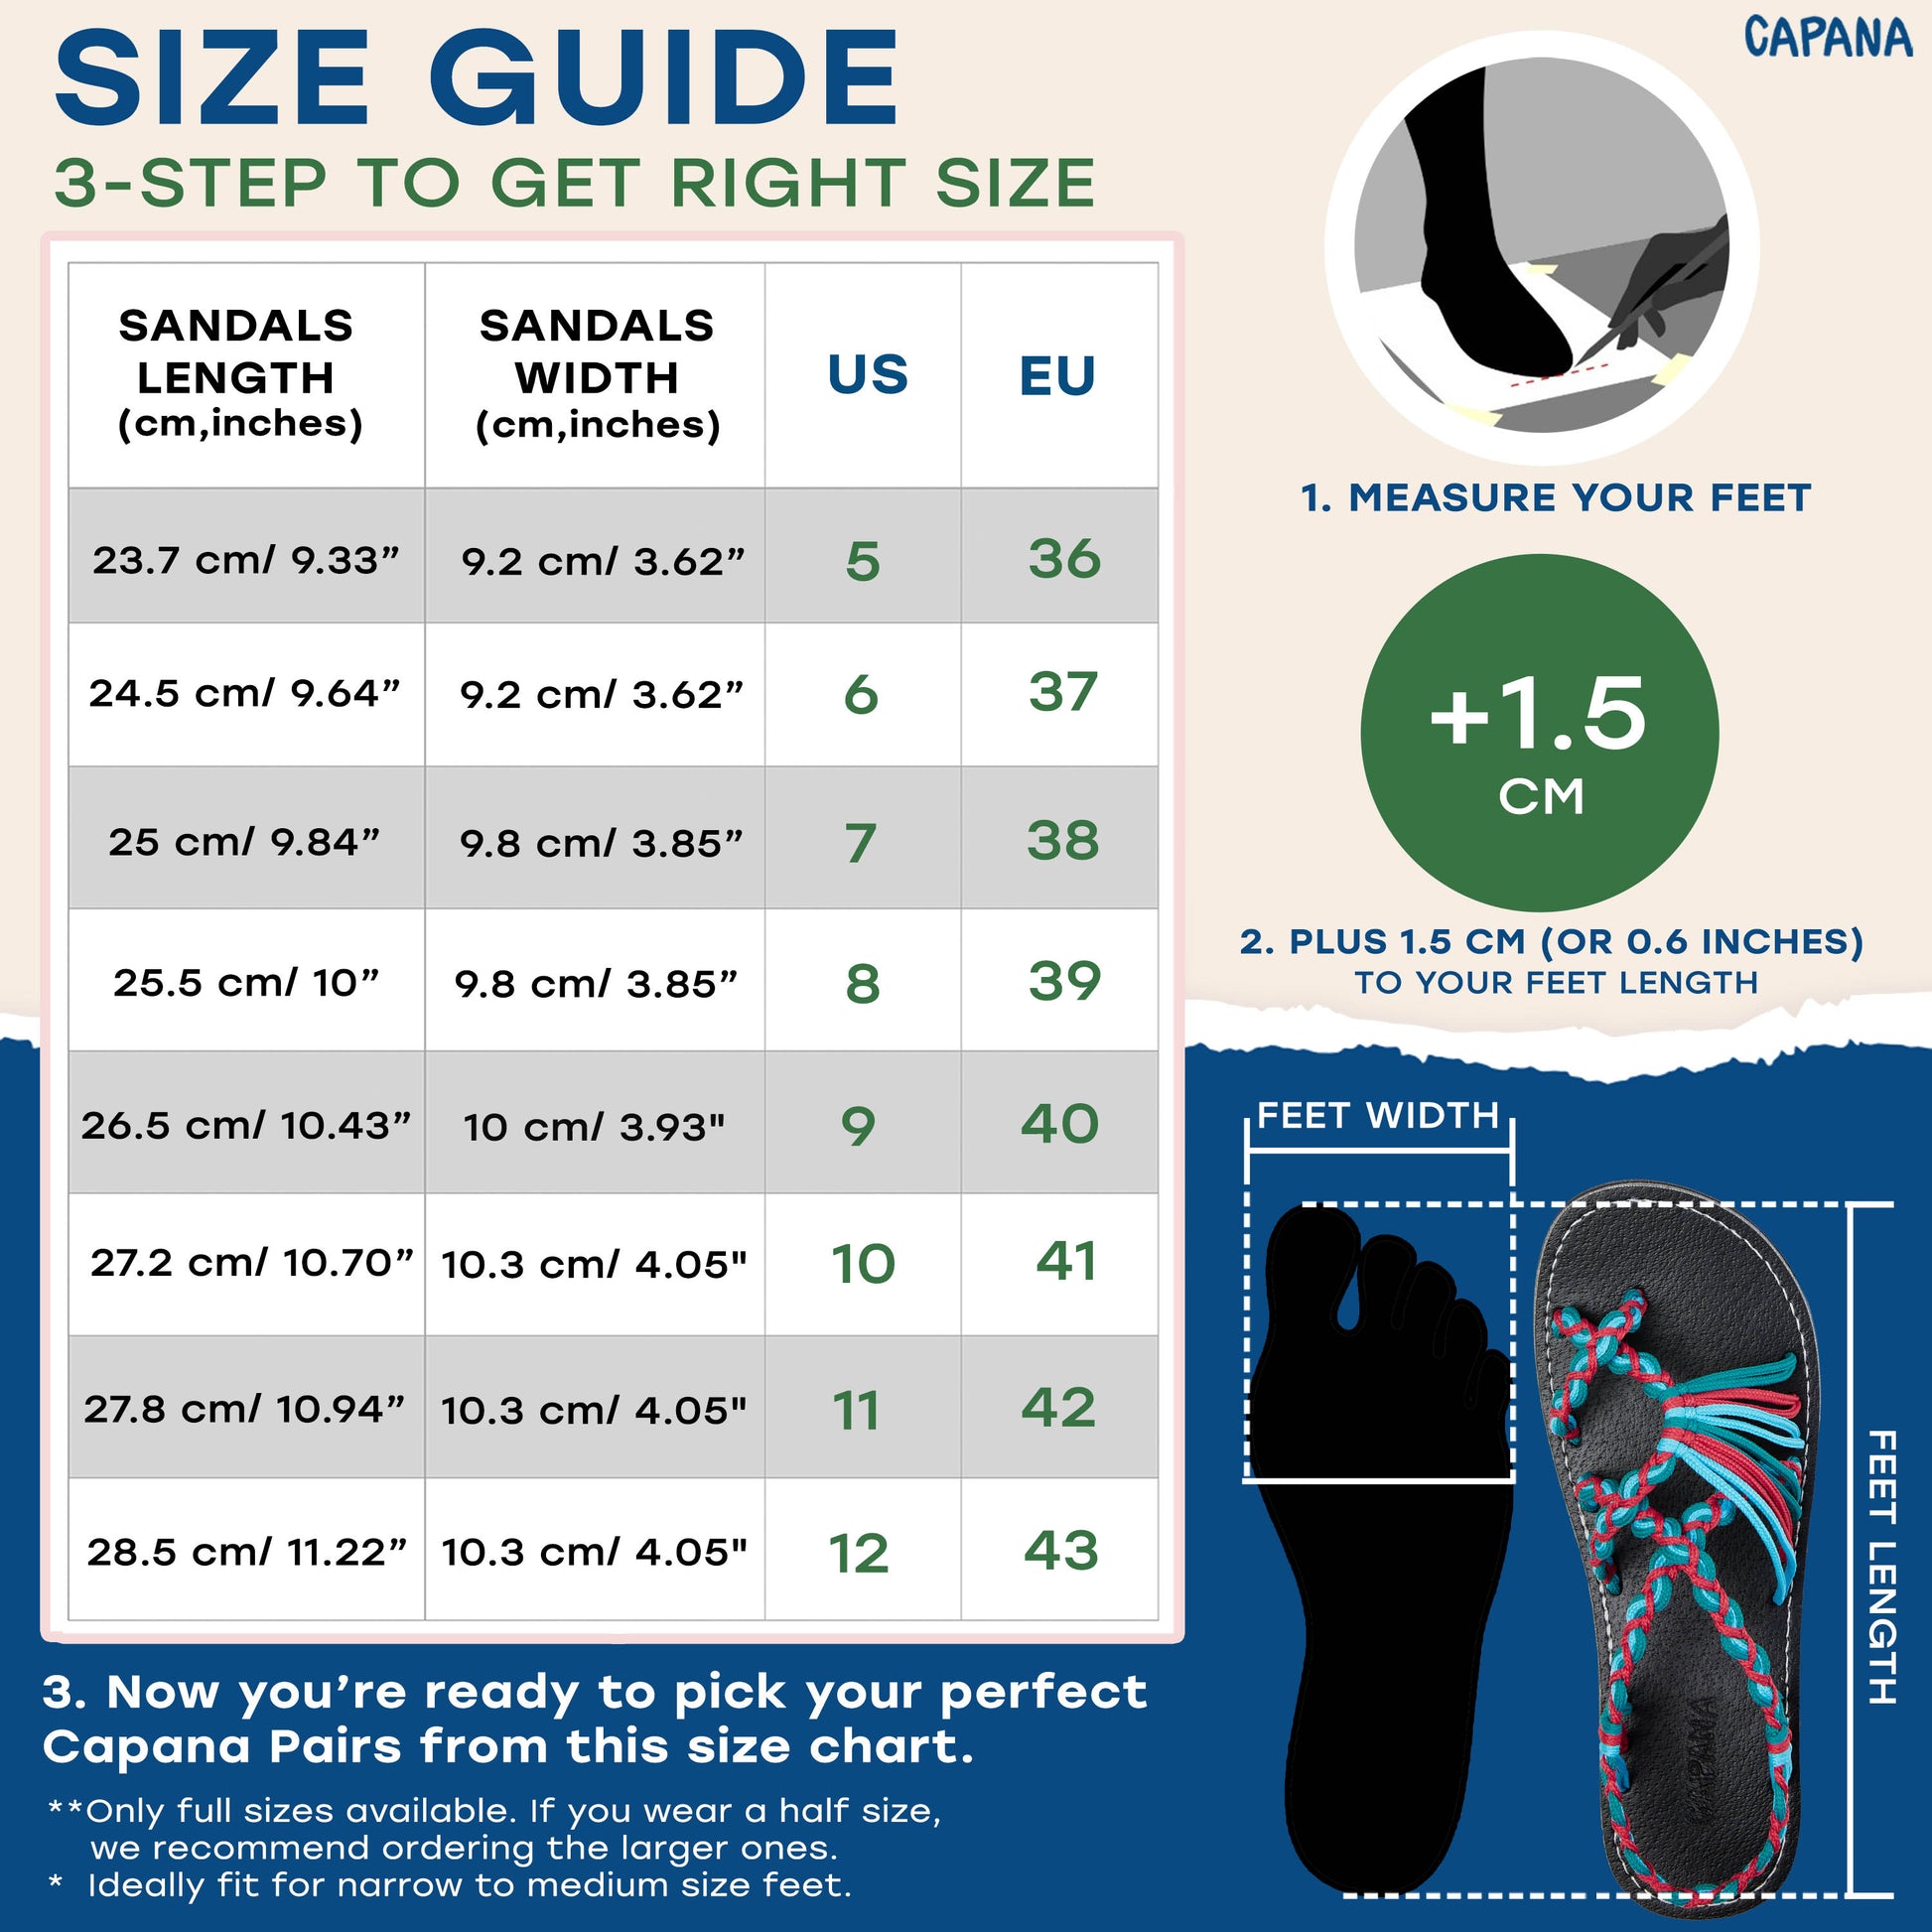 Capana size chart Red Teal